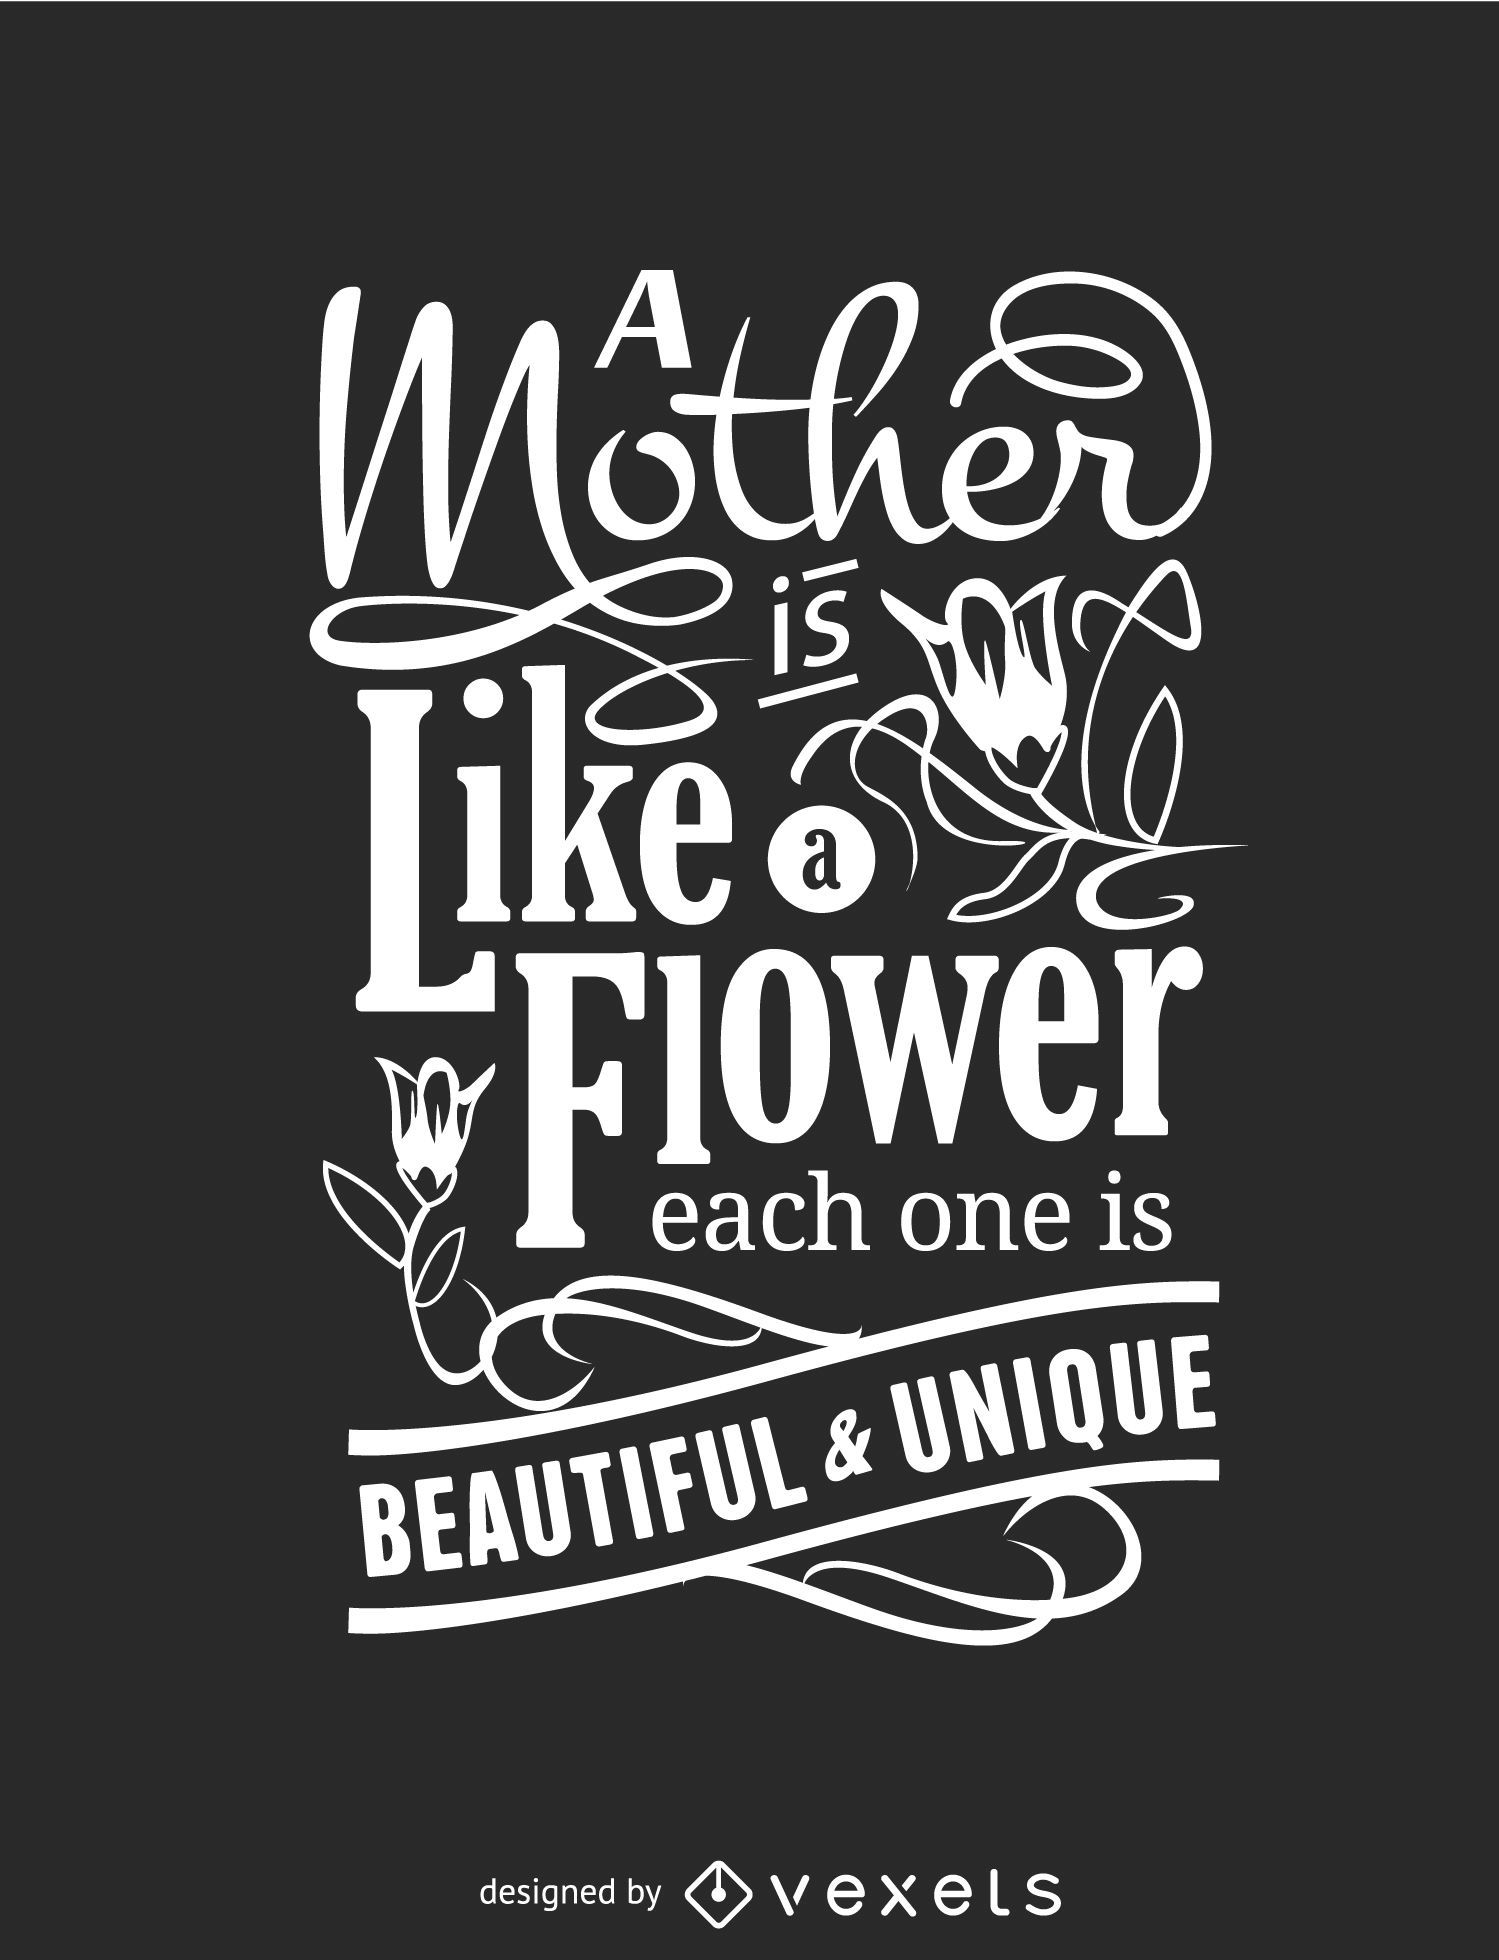 Mother's Day typographic poster